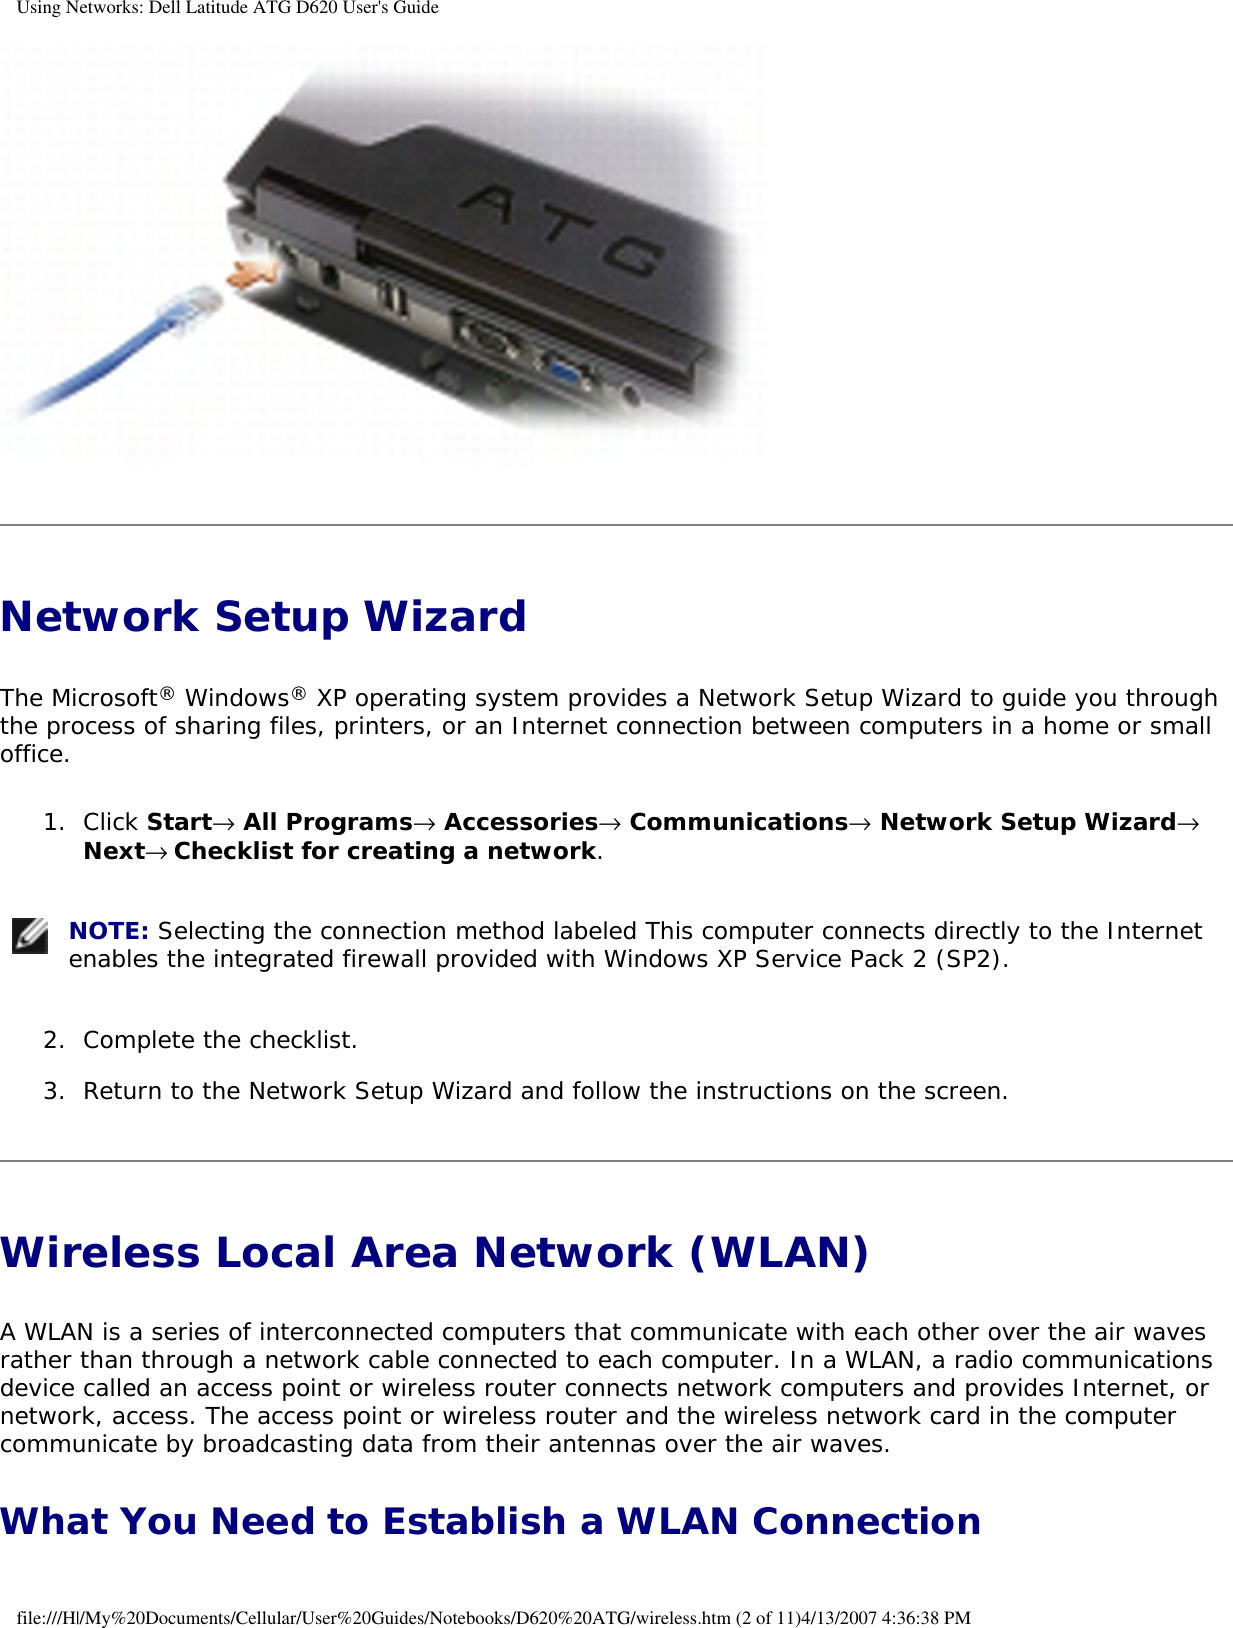 Using Networks: Dell Latitude ATG D620 User&apos;s Guide Network Setup Wizard The Microsoft® Windows® XP operating system provides a Network Setup Wizard to guide you through the process of sharing files, printers, or an Internet connection between computers in a home or small office.1.  Click Start→ All Programs→ Accessories→ Communications→ Network Setup Wizard→ Next→ Checklist for creating a network.    NOTE: Selecting the connection method labeled This computer connects directly to the Internet enables the integrated firewall provided with Windows XP Service Pack 2 (SP2). 2.  Complete the checklist.   3.  Return to the Network Setup Wizard and follow the instructions on the screen.   Wireless Local Area Network (WLAN) A WLAN is a series of interconnected computers that communicate with each other over the air waves rather than through a network cable connected to each computer. In a WLAN, a radio communications device called an access point or wireless router connects network computers and provides Internet, or network, access. The access point or wireless router and the wireless network card in the computer communicate by broadcasting data from their antennas over the air waves.What You Need to Establish a WLAN Connectionfile:///H|/My%20Documents/Cellular/User%20Guides/Notebooks/D620%20ATG/wireless.htm (2 of 11)4/13/2007 4:36:38 PM